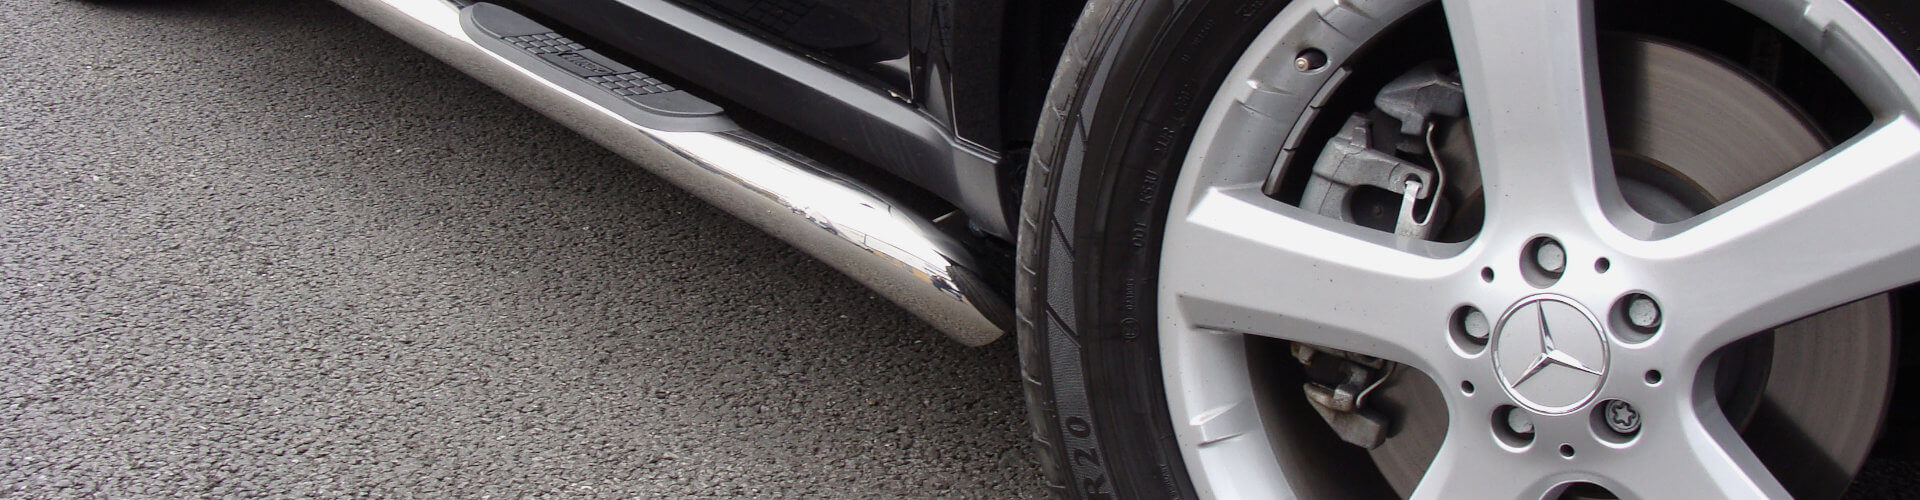 Direct4x4 Accessories UK | Mercedes Benz Side Steps, Side Bars & Running Boards